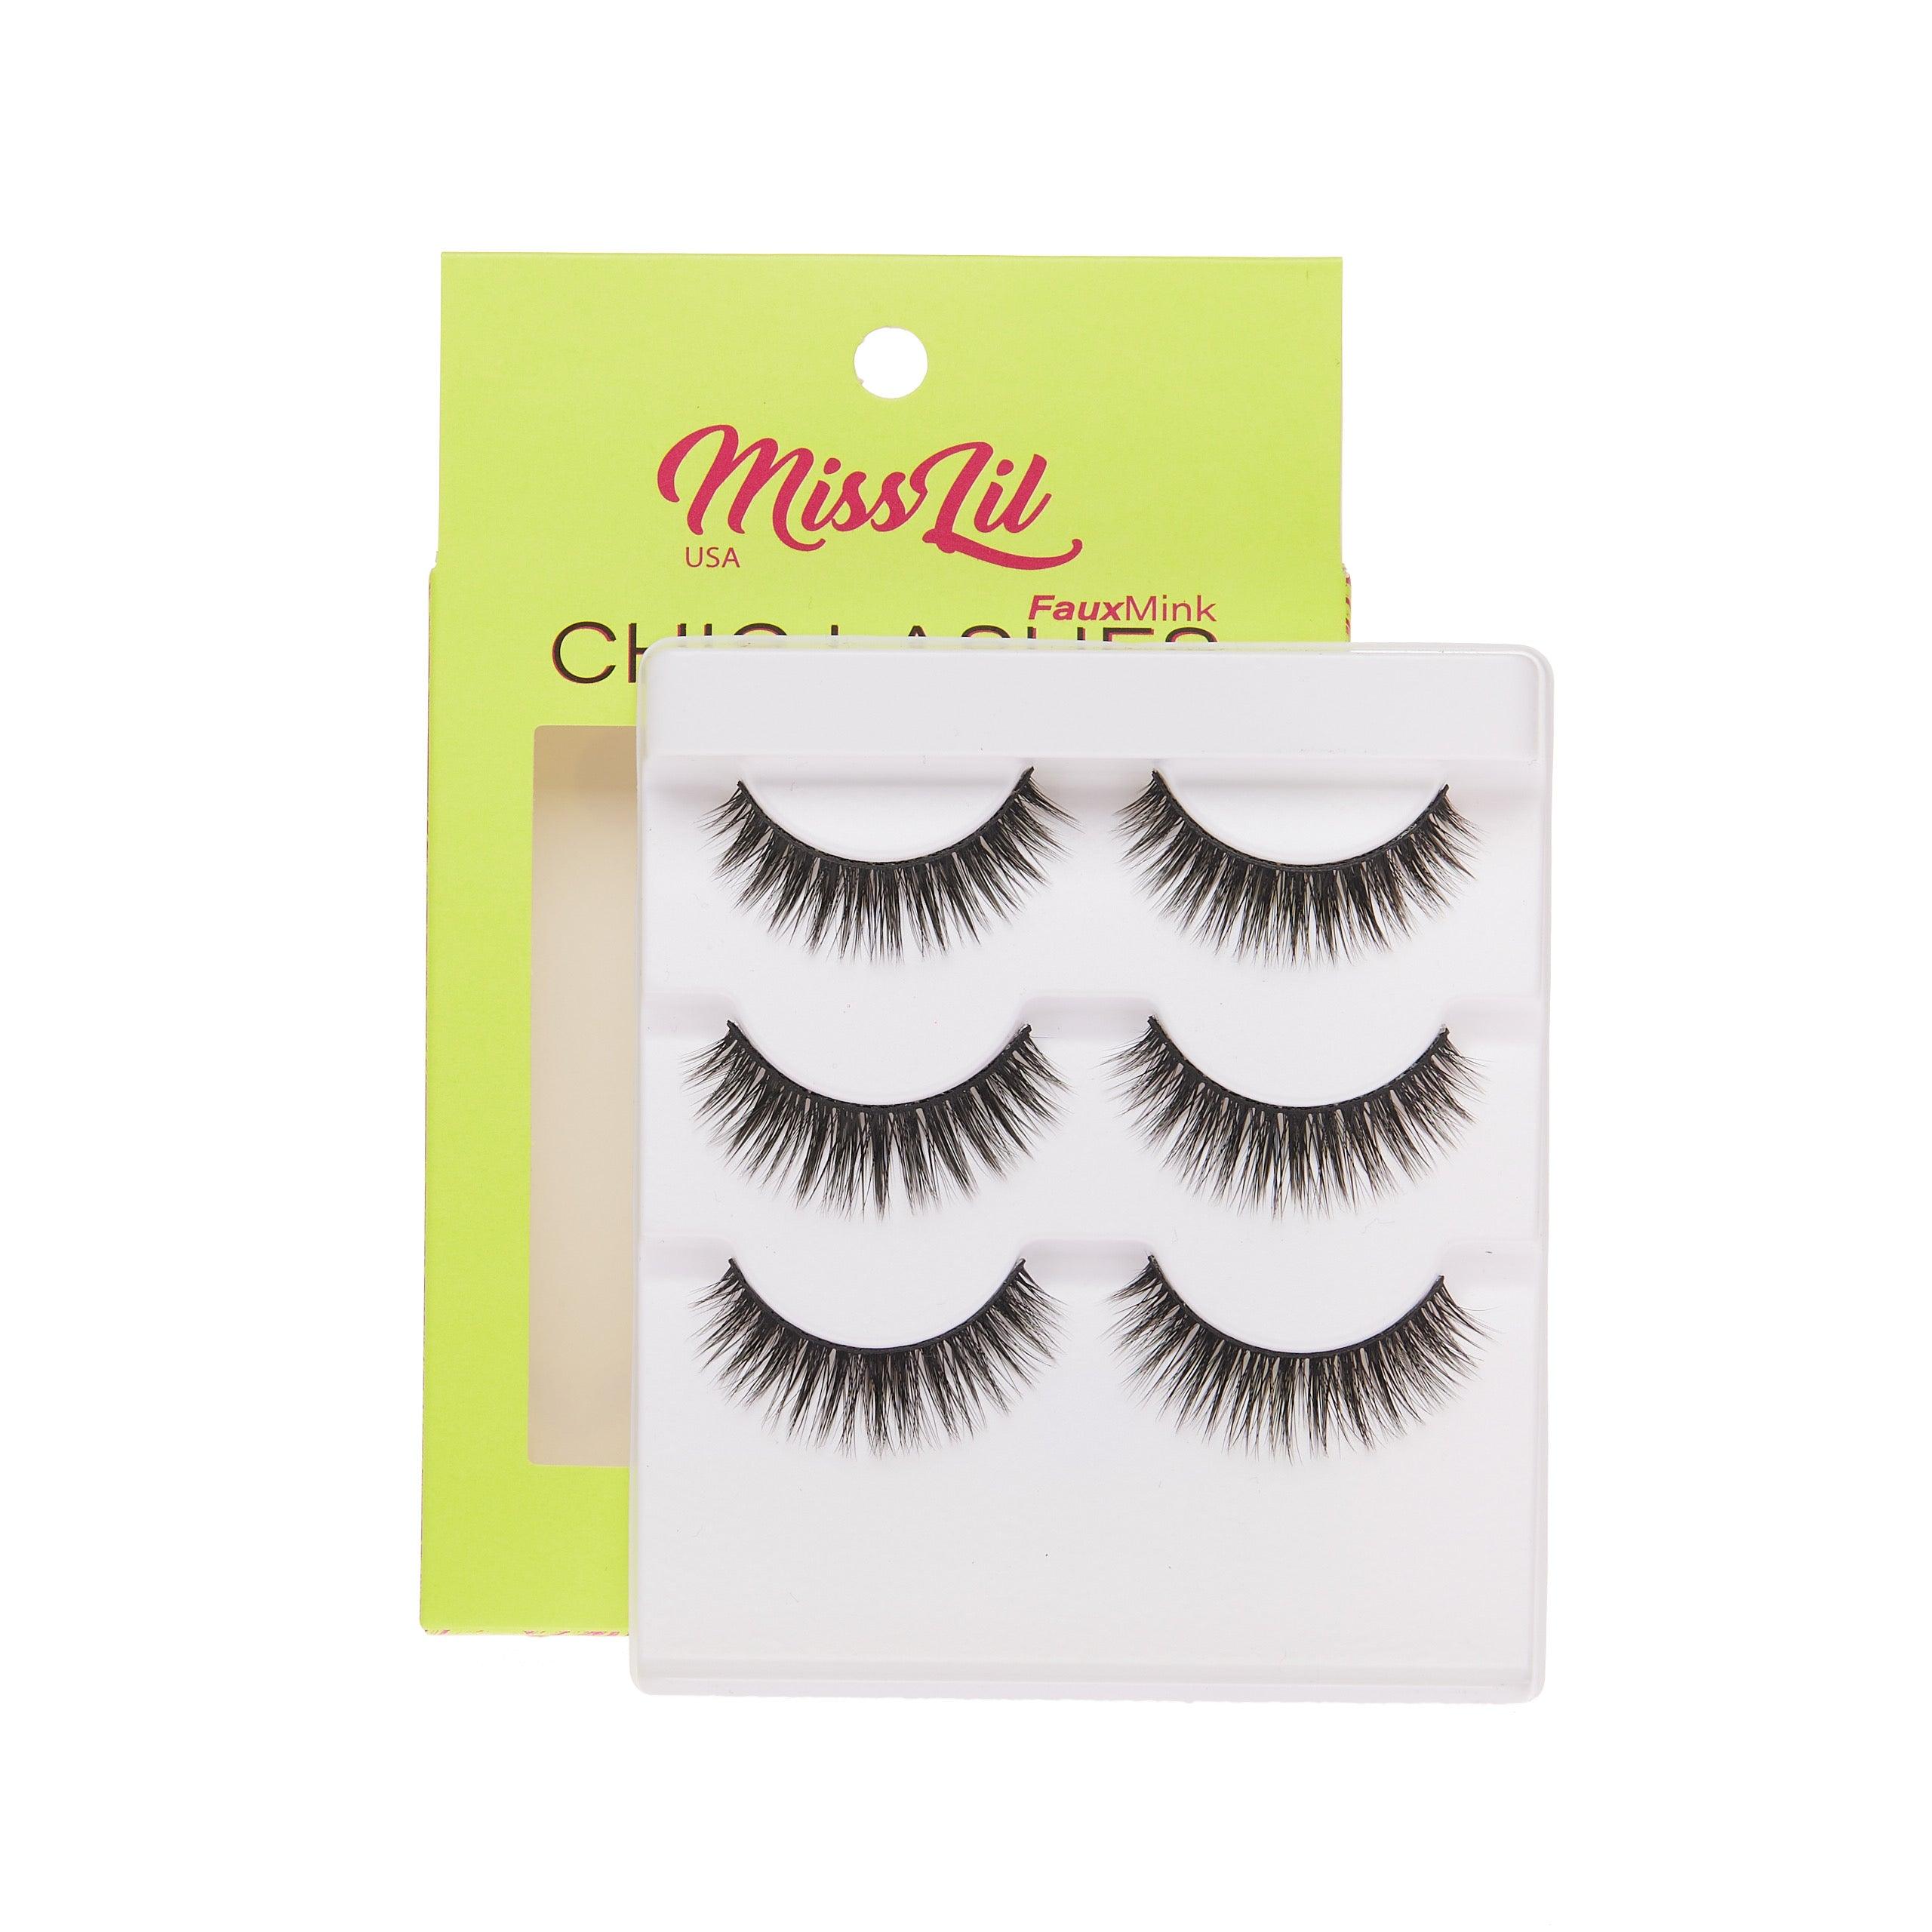 3-Pair Faux Mink Eyelashes - Chic Lashes Collection #28 - Pack of 3 - Miss Lil USA